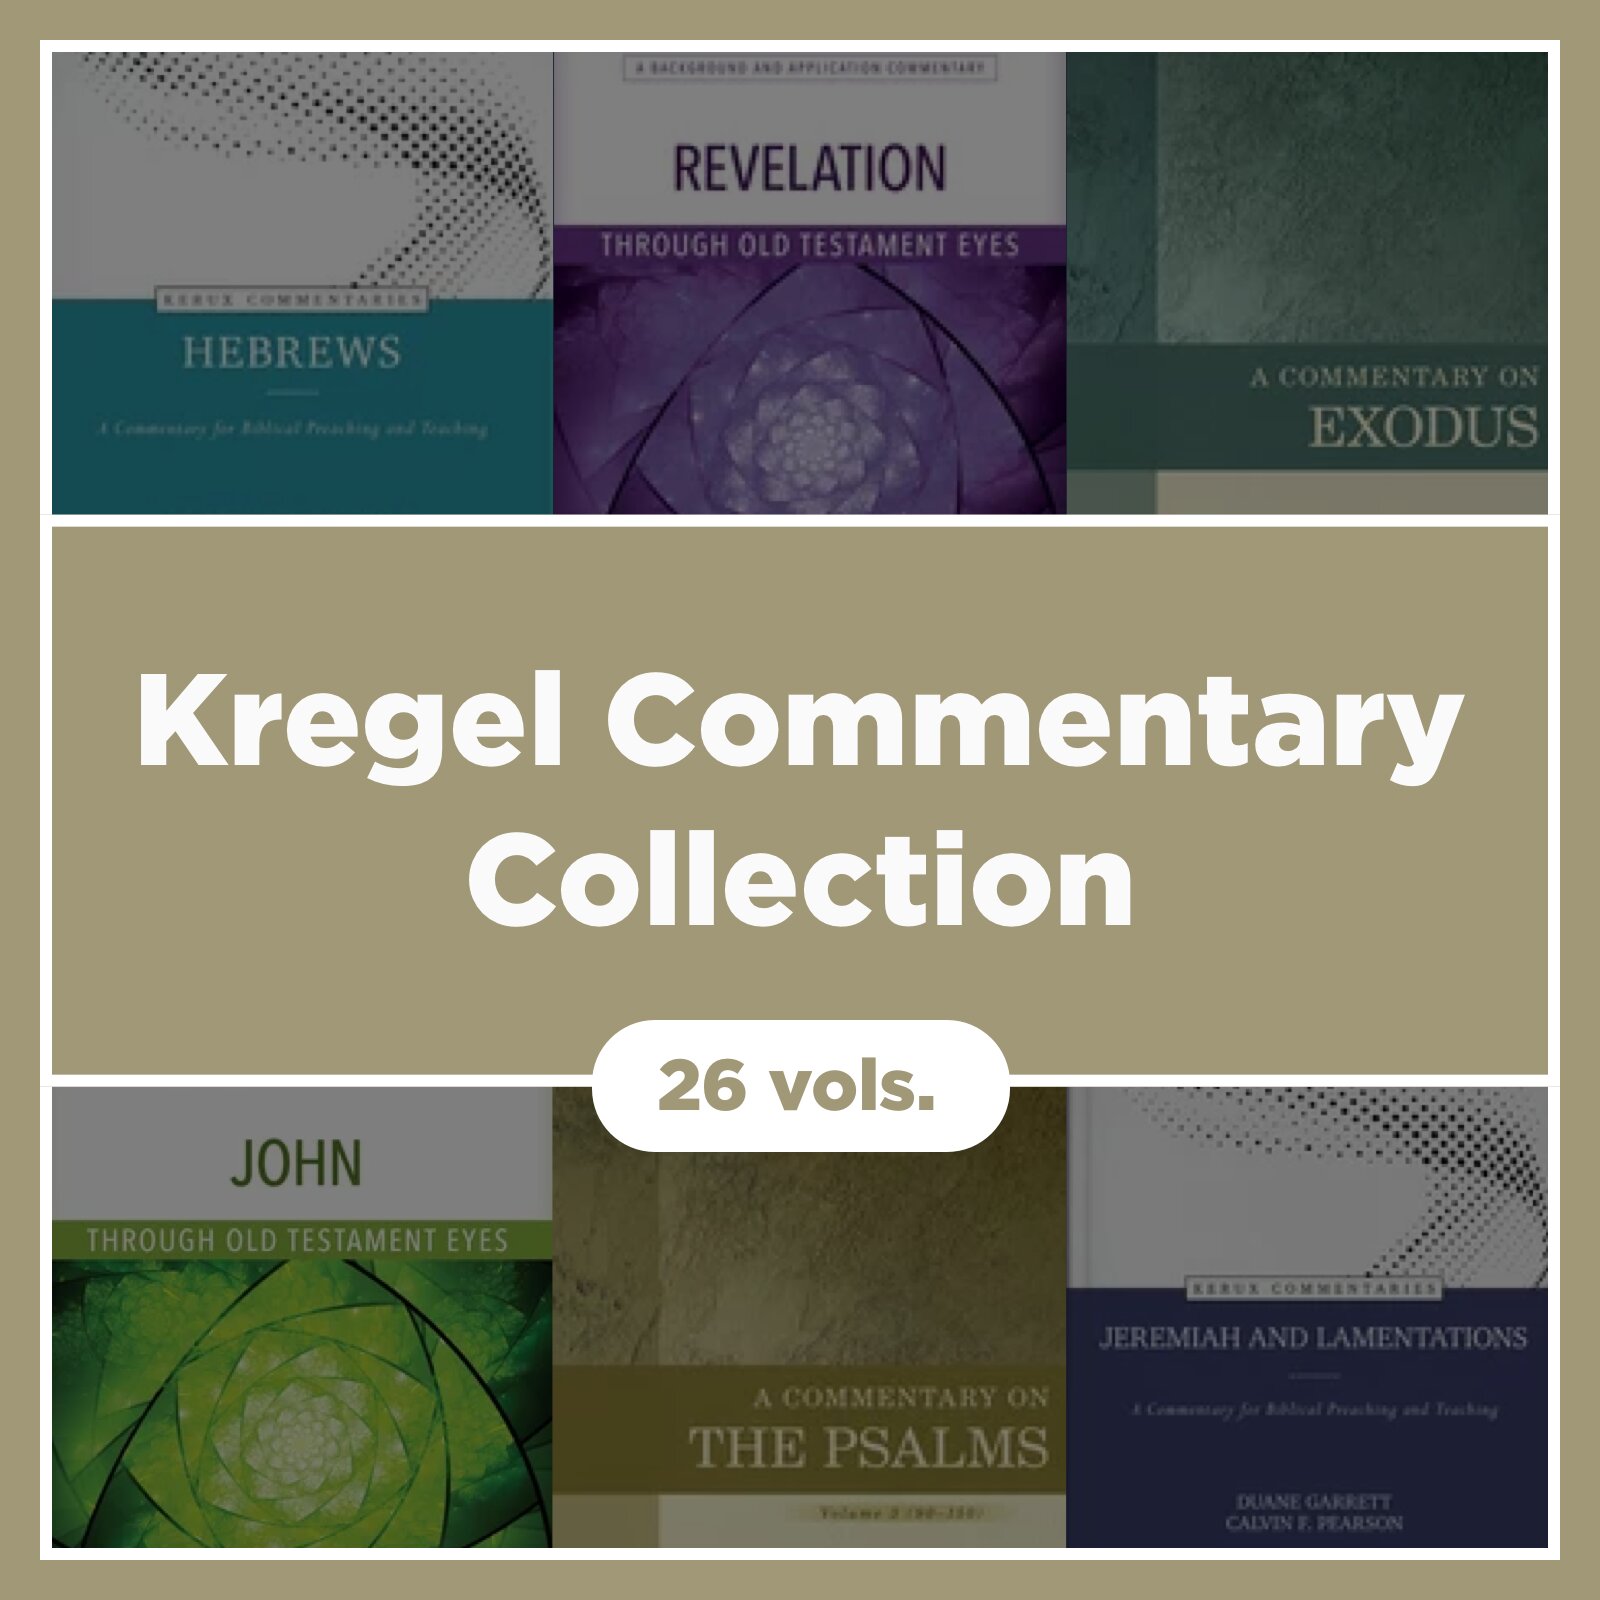 Kregel Commentary Collection (26 vols.)